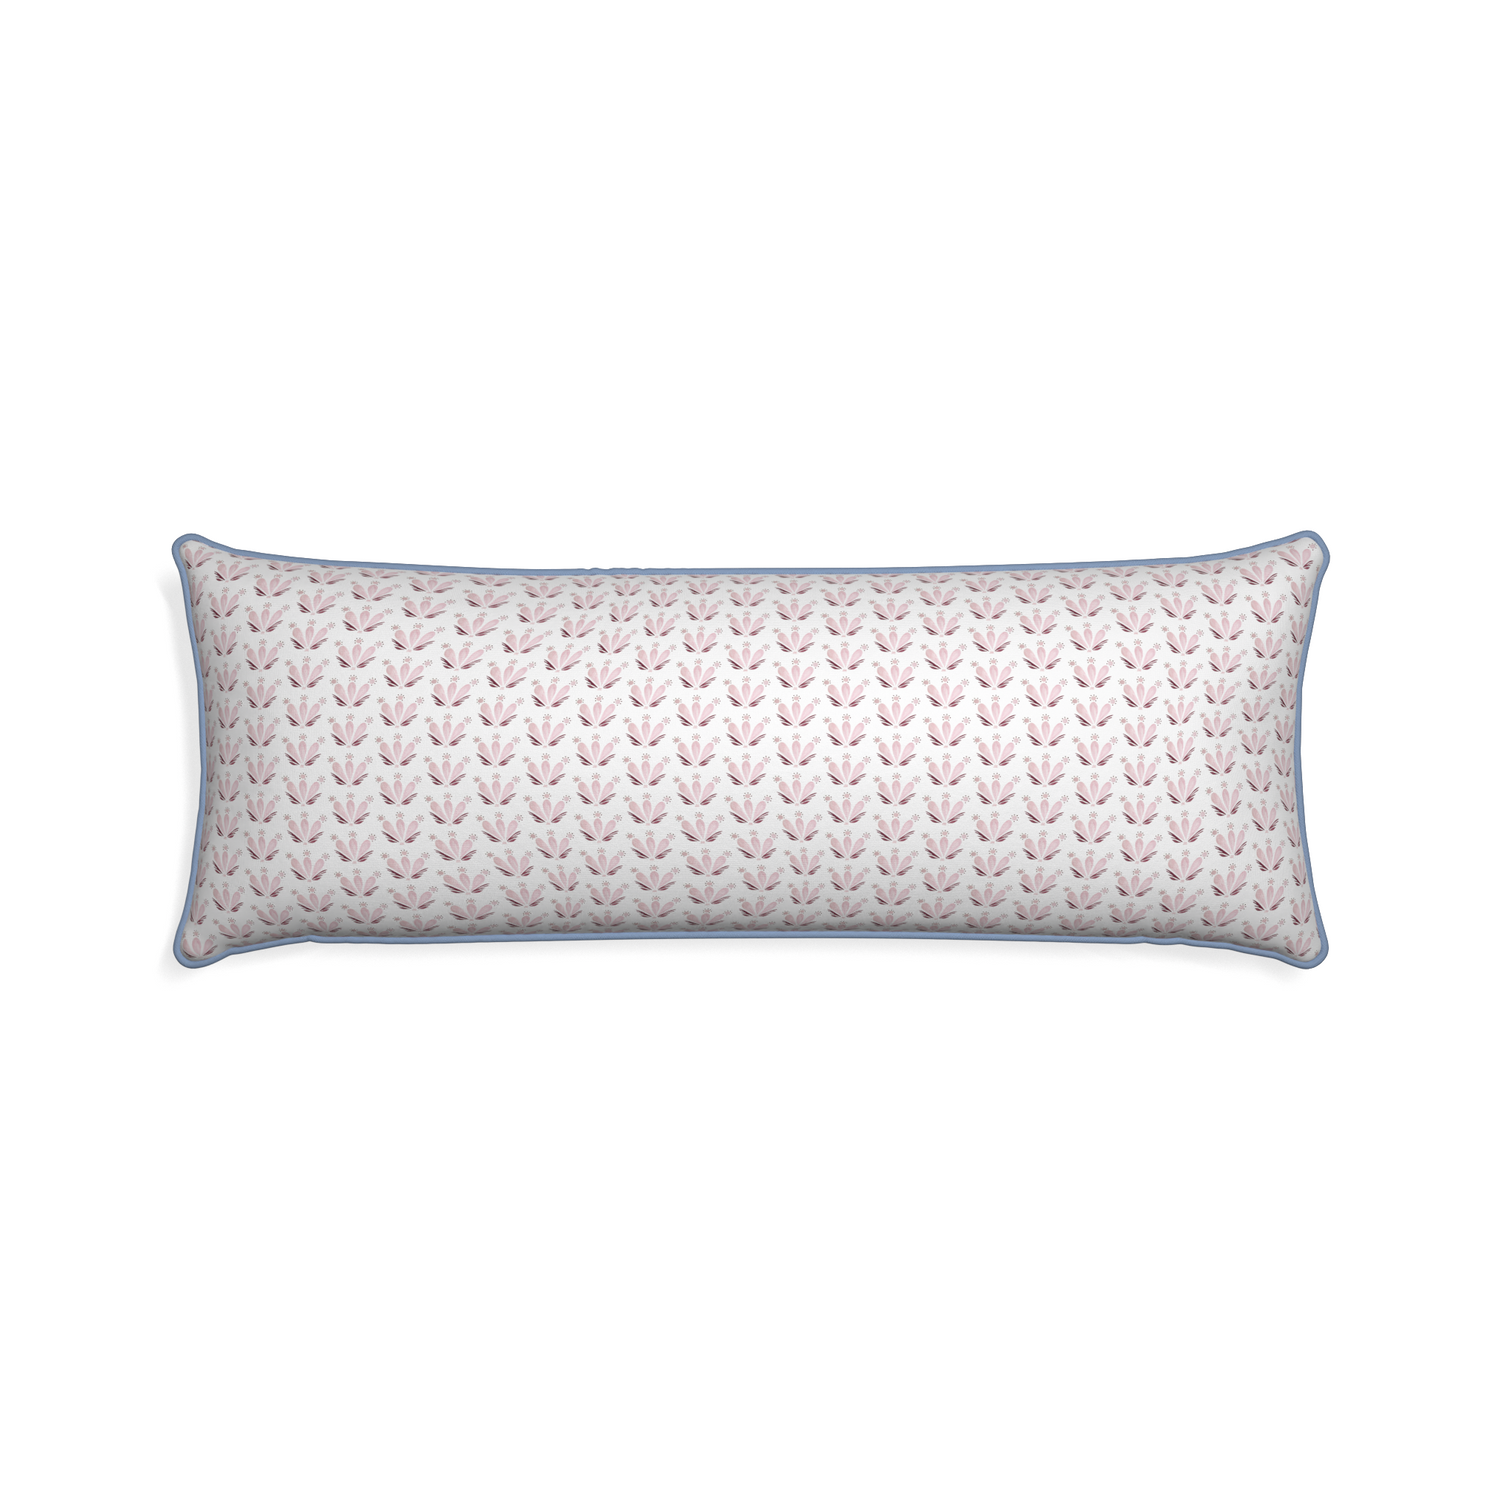 Xl-lumbar serena pink custom pillow with sky piping on white background